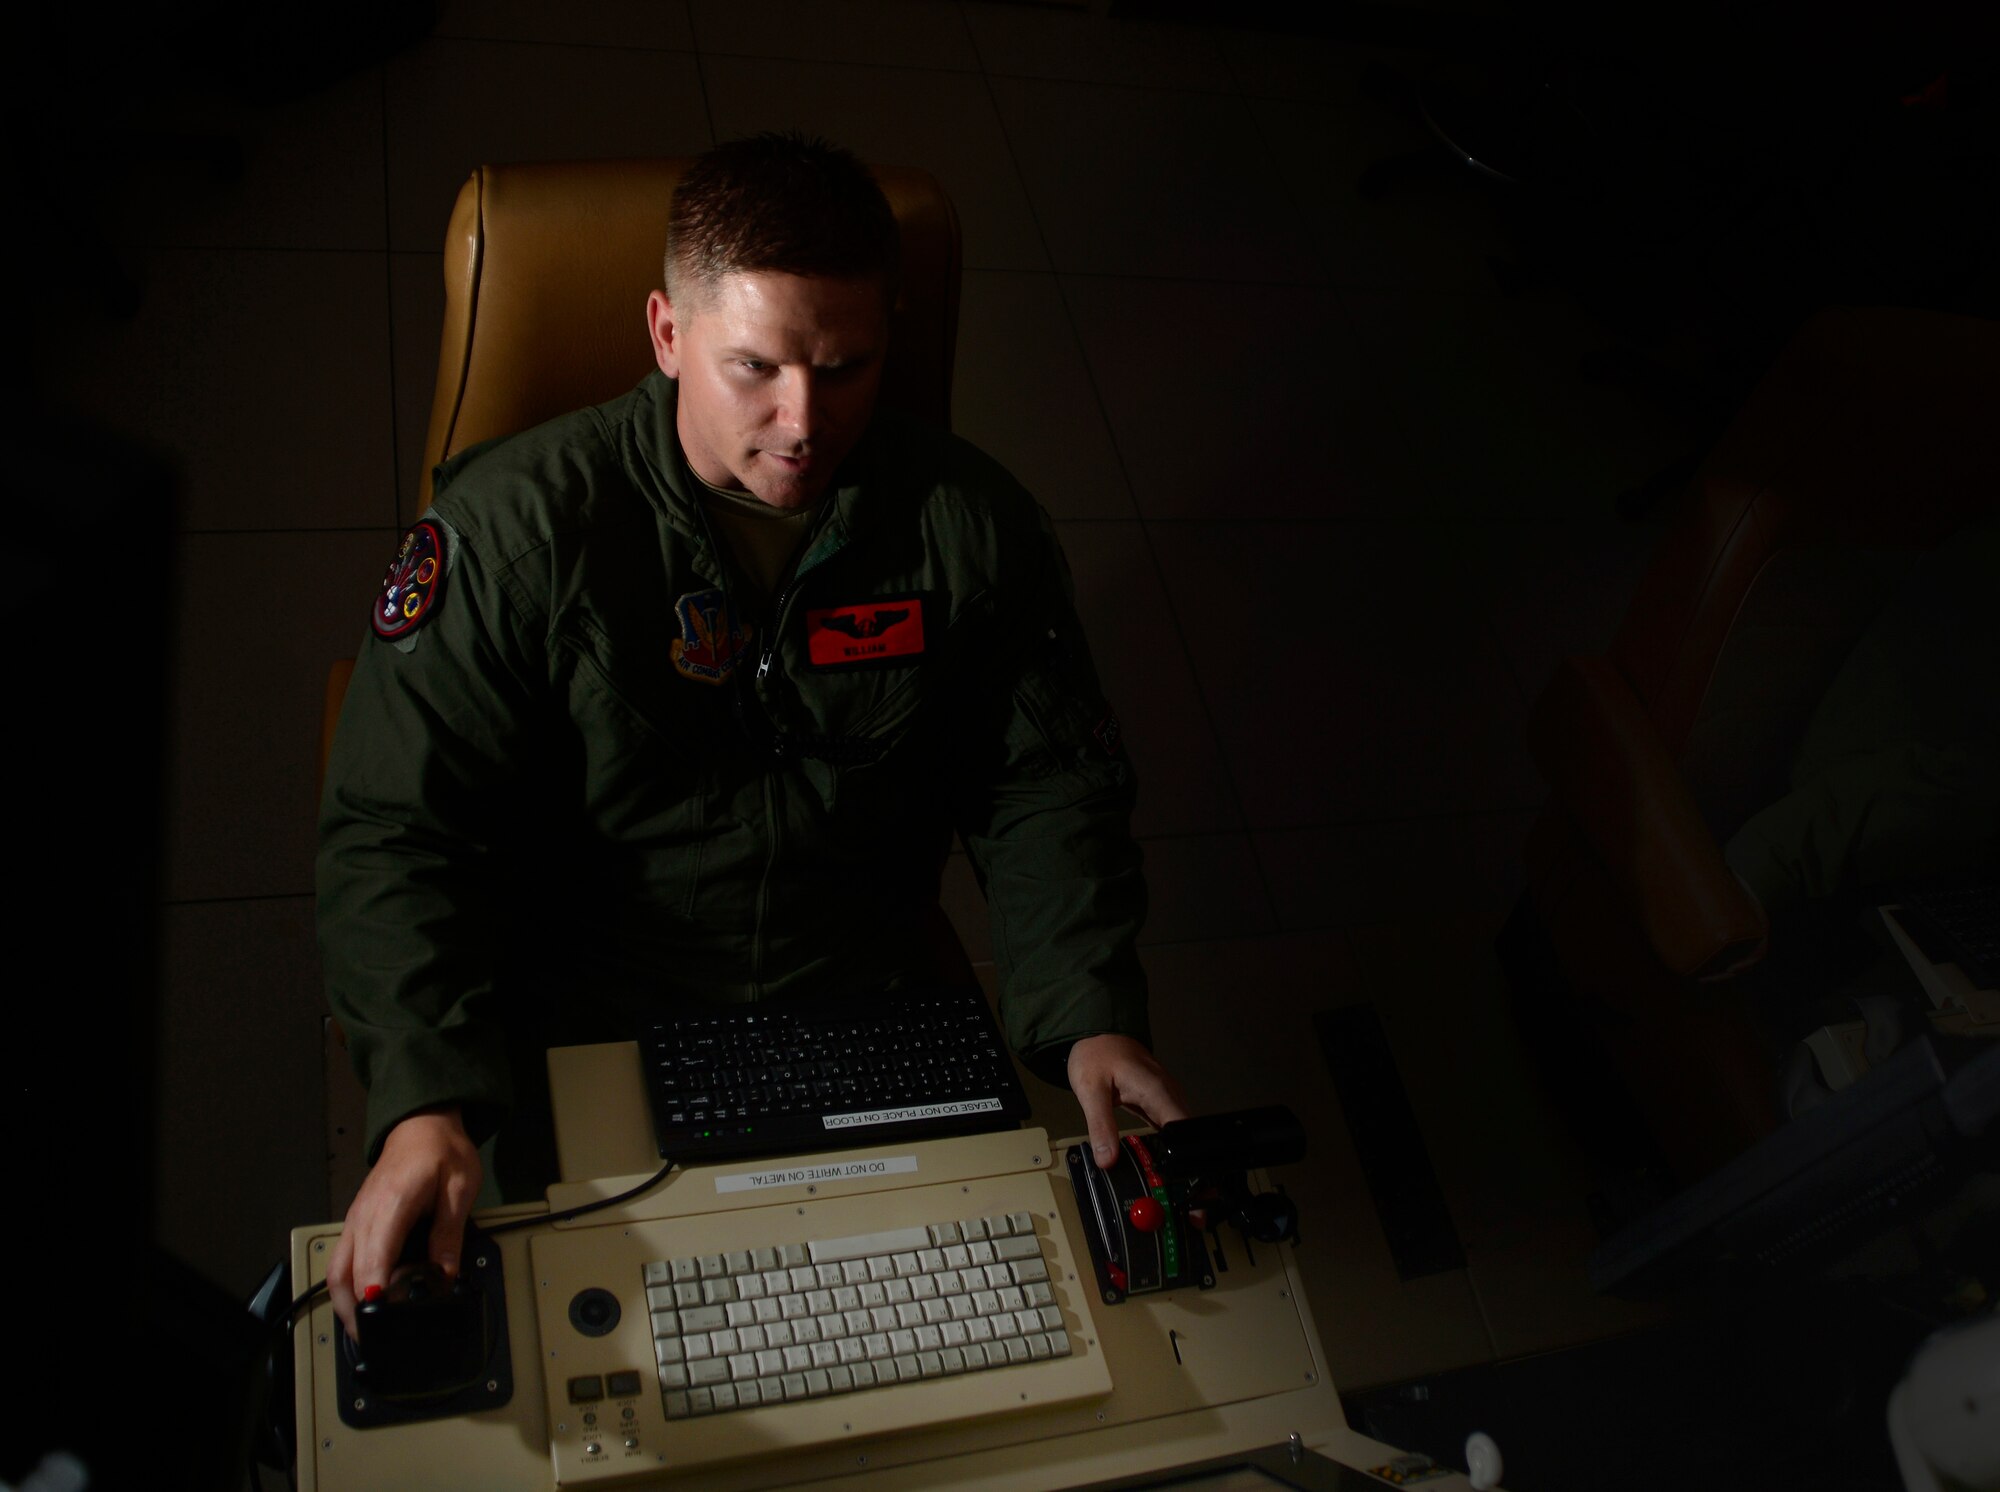 Tech. Sgt. William, 432nd Wing/432nd Air Expeditionary Wing sensor operator, flies a simulated mission June 10, 2016, at Creech Air Force Base, Nevada. The 432nd WG trains and deploys MQ-1 Predator and MQ-9 Reaper aircrews in support of global operations 24/7/365. (U.S. Air Force photo by Senior Airman Christian Clausen/Released)